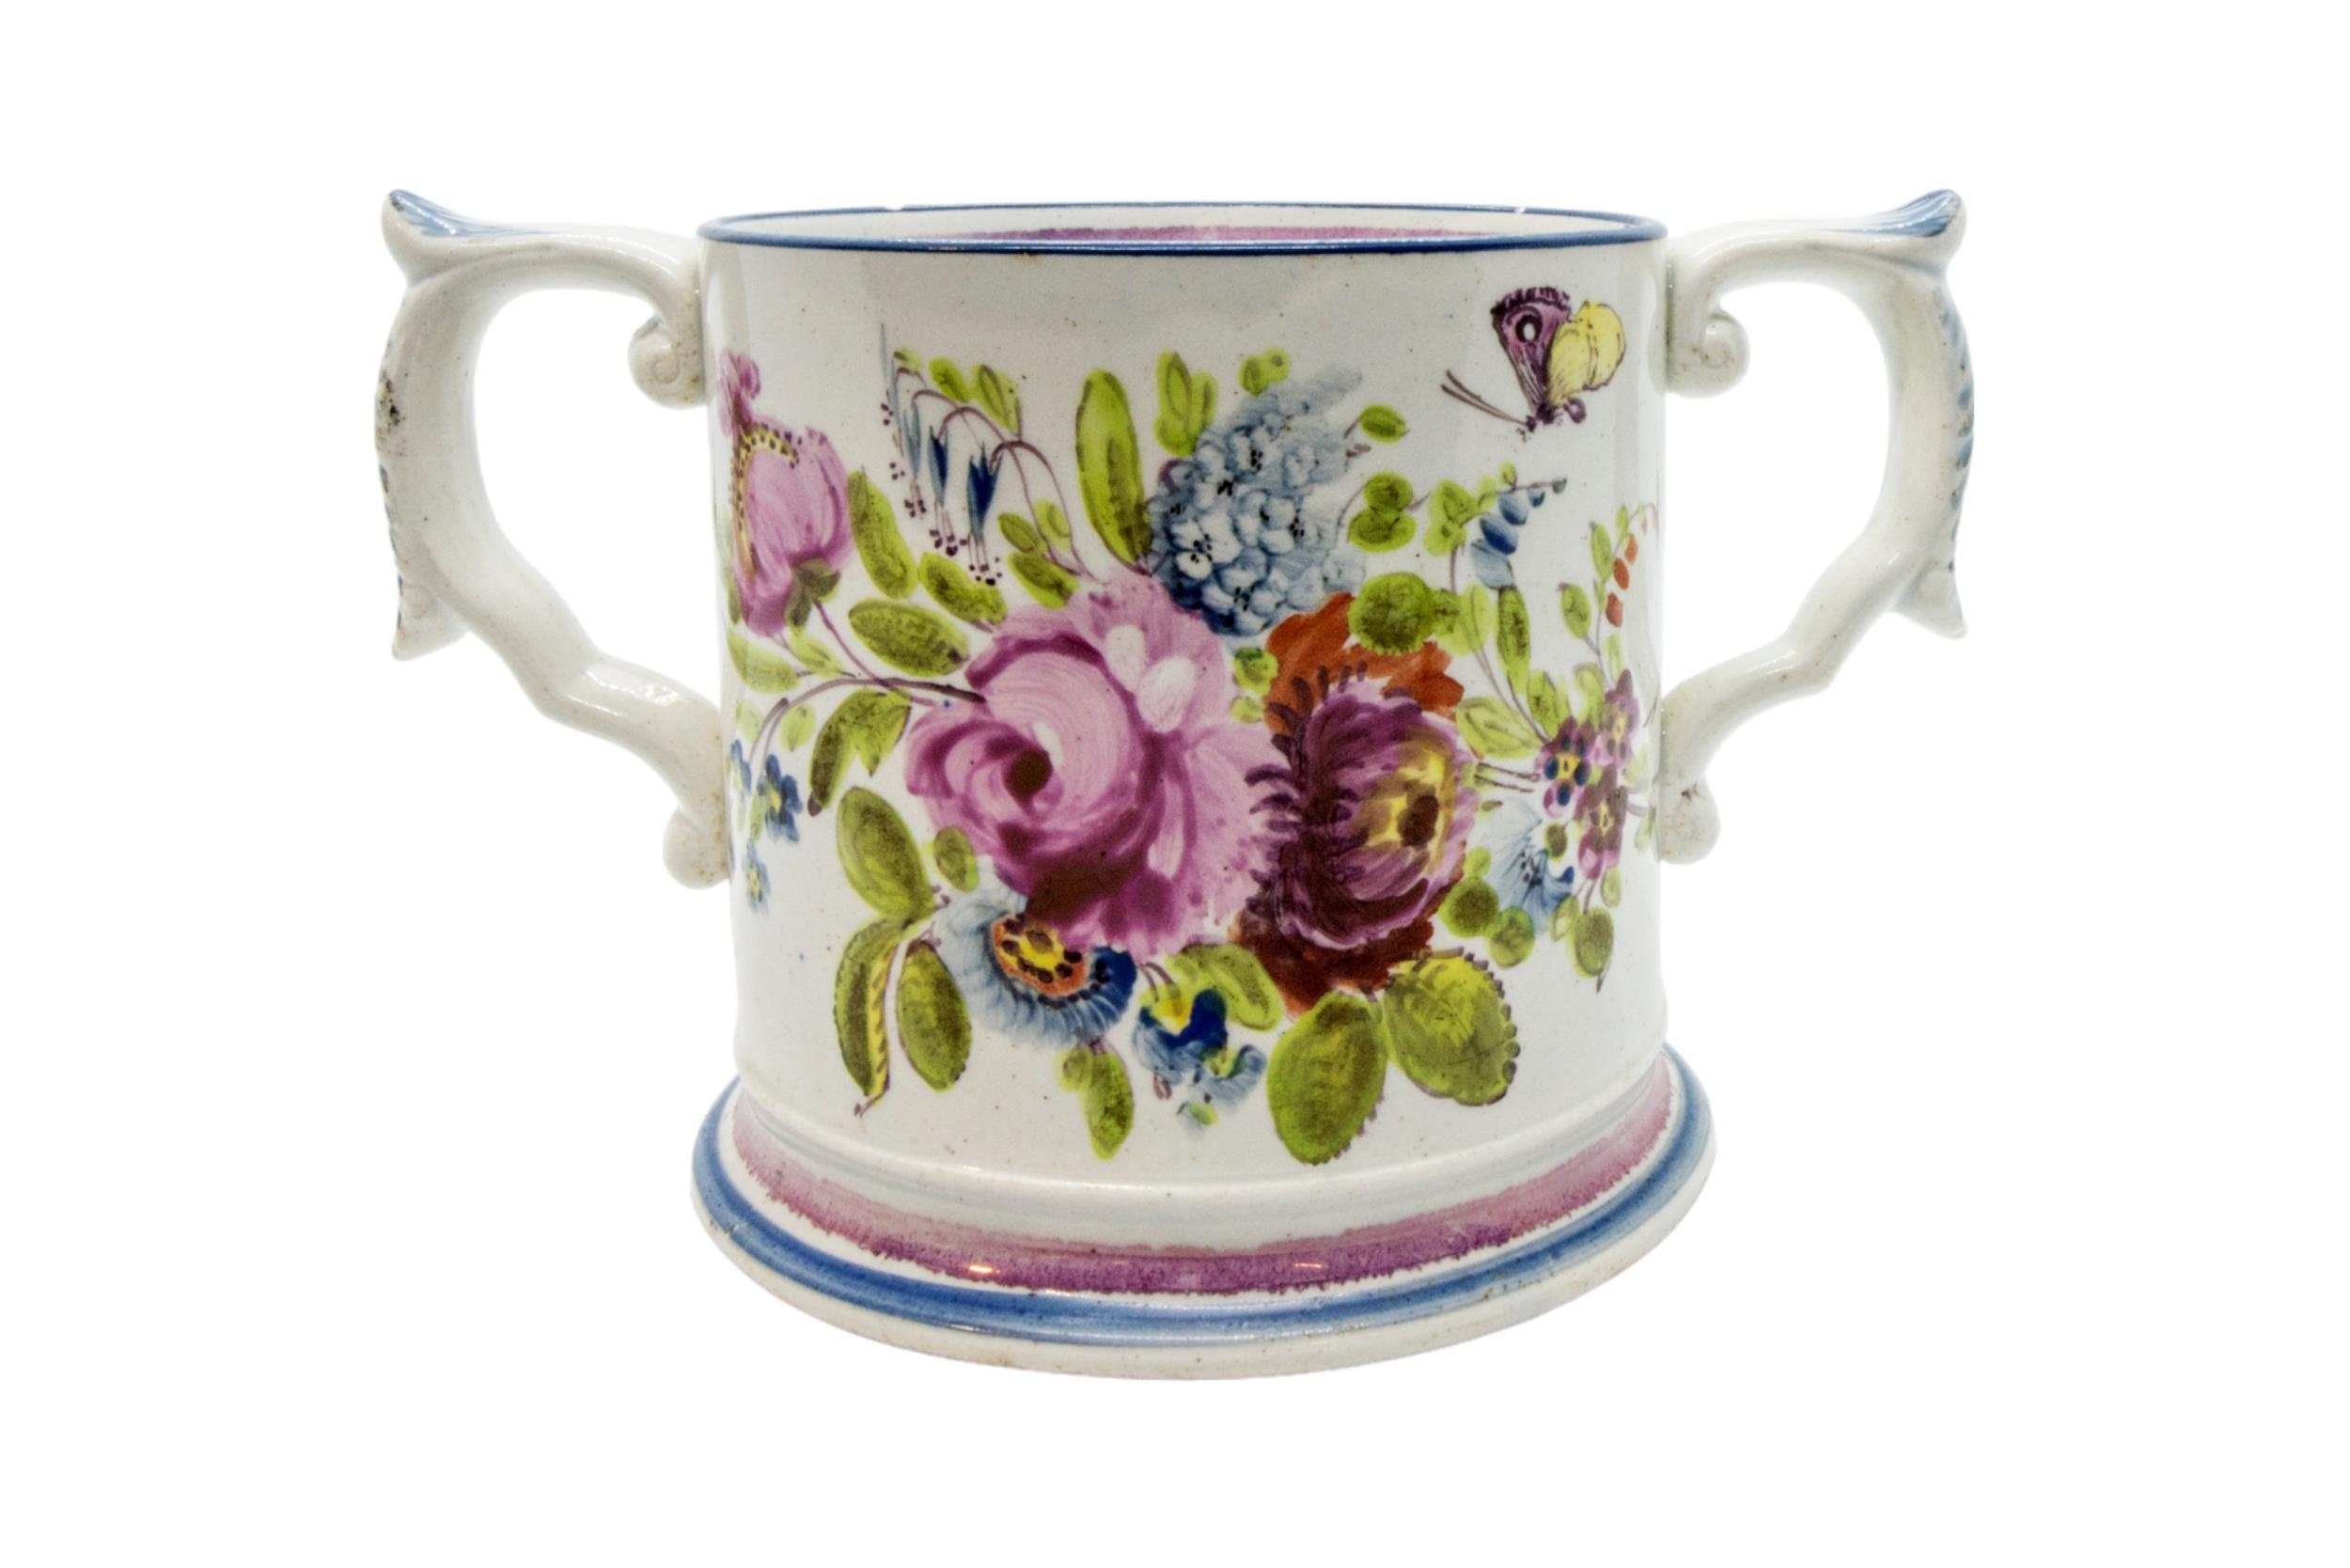 A PINK LUSTRE LOVING CUP Named and dated "Margaret Lockhart 1848", 9.5cms high